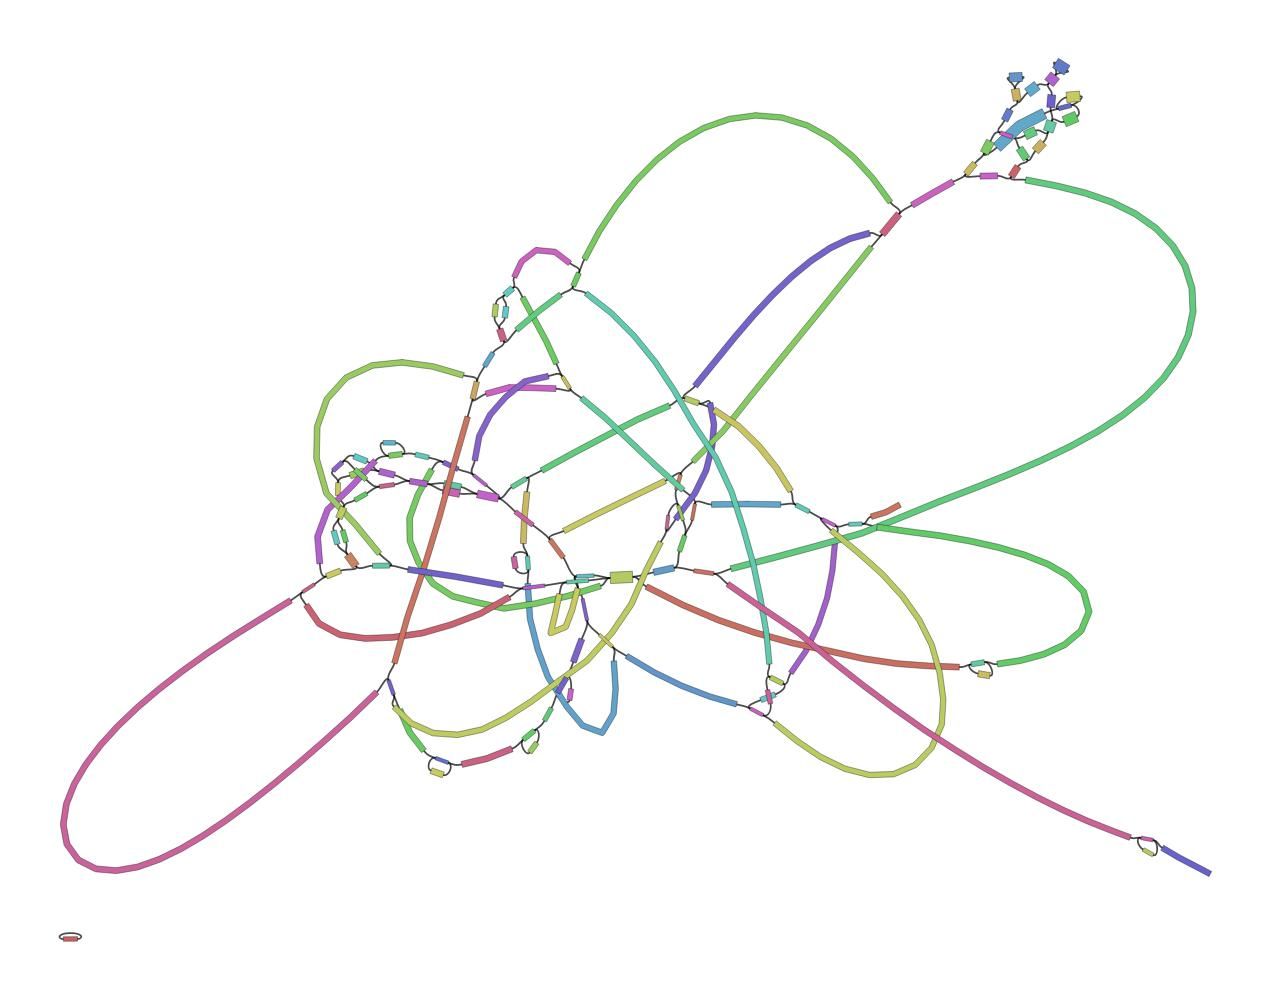 Bandage output showing a mess of a genome graph. 